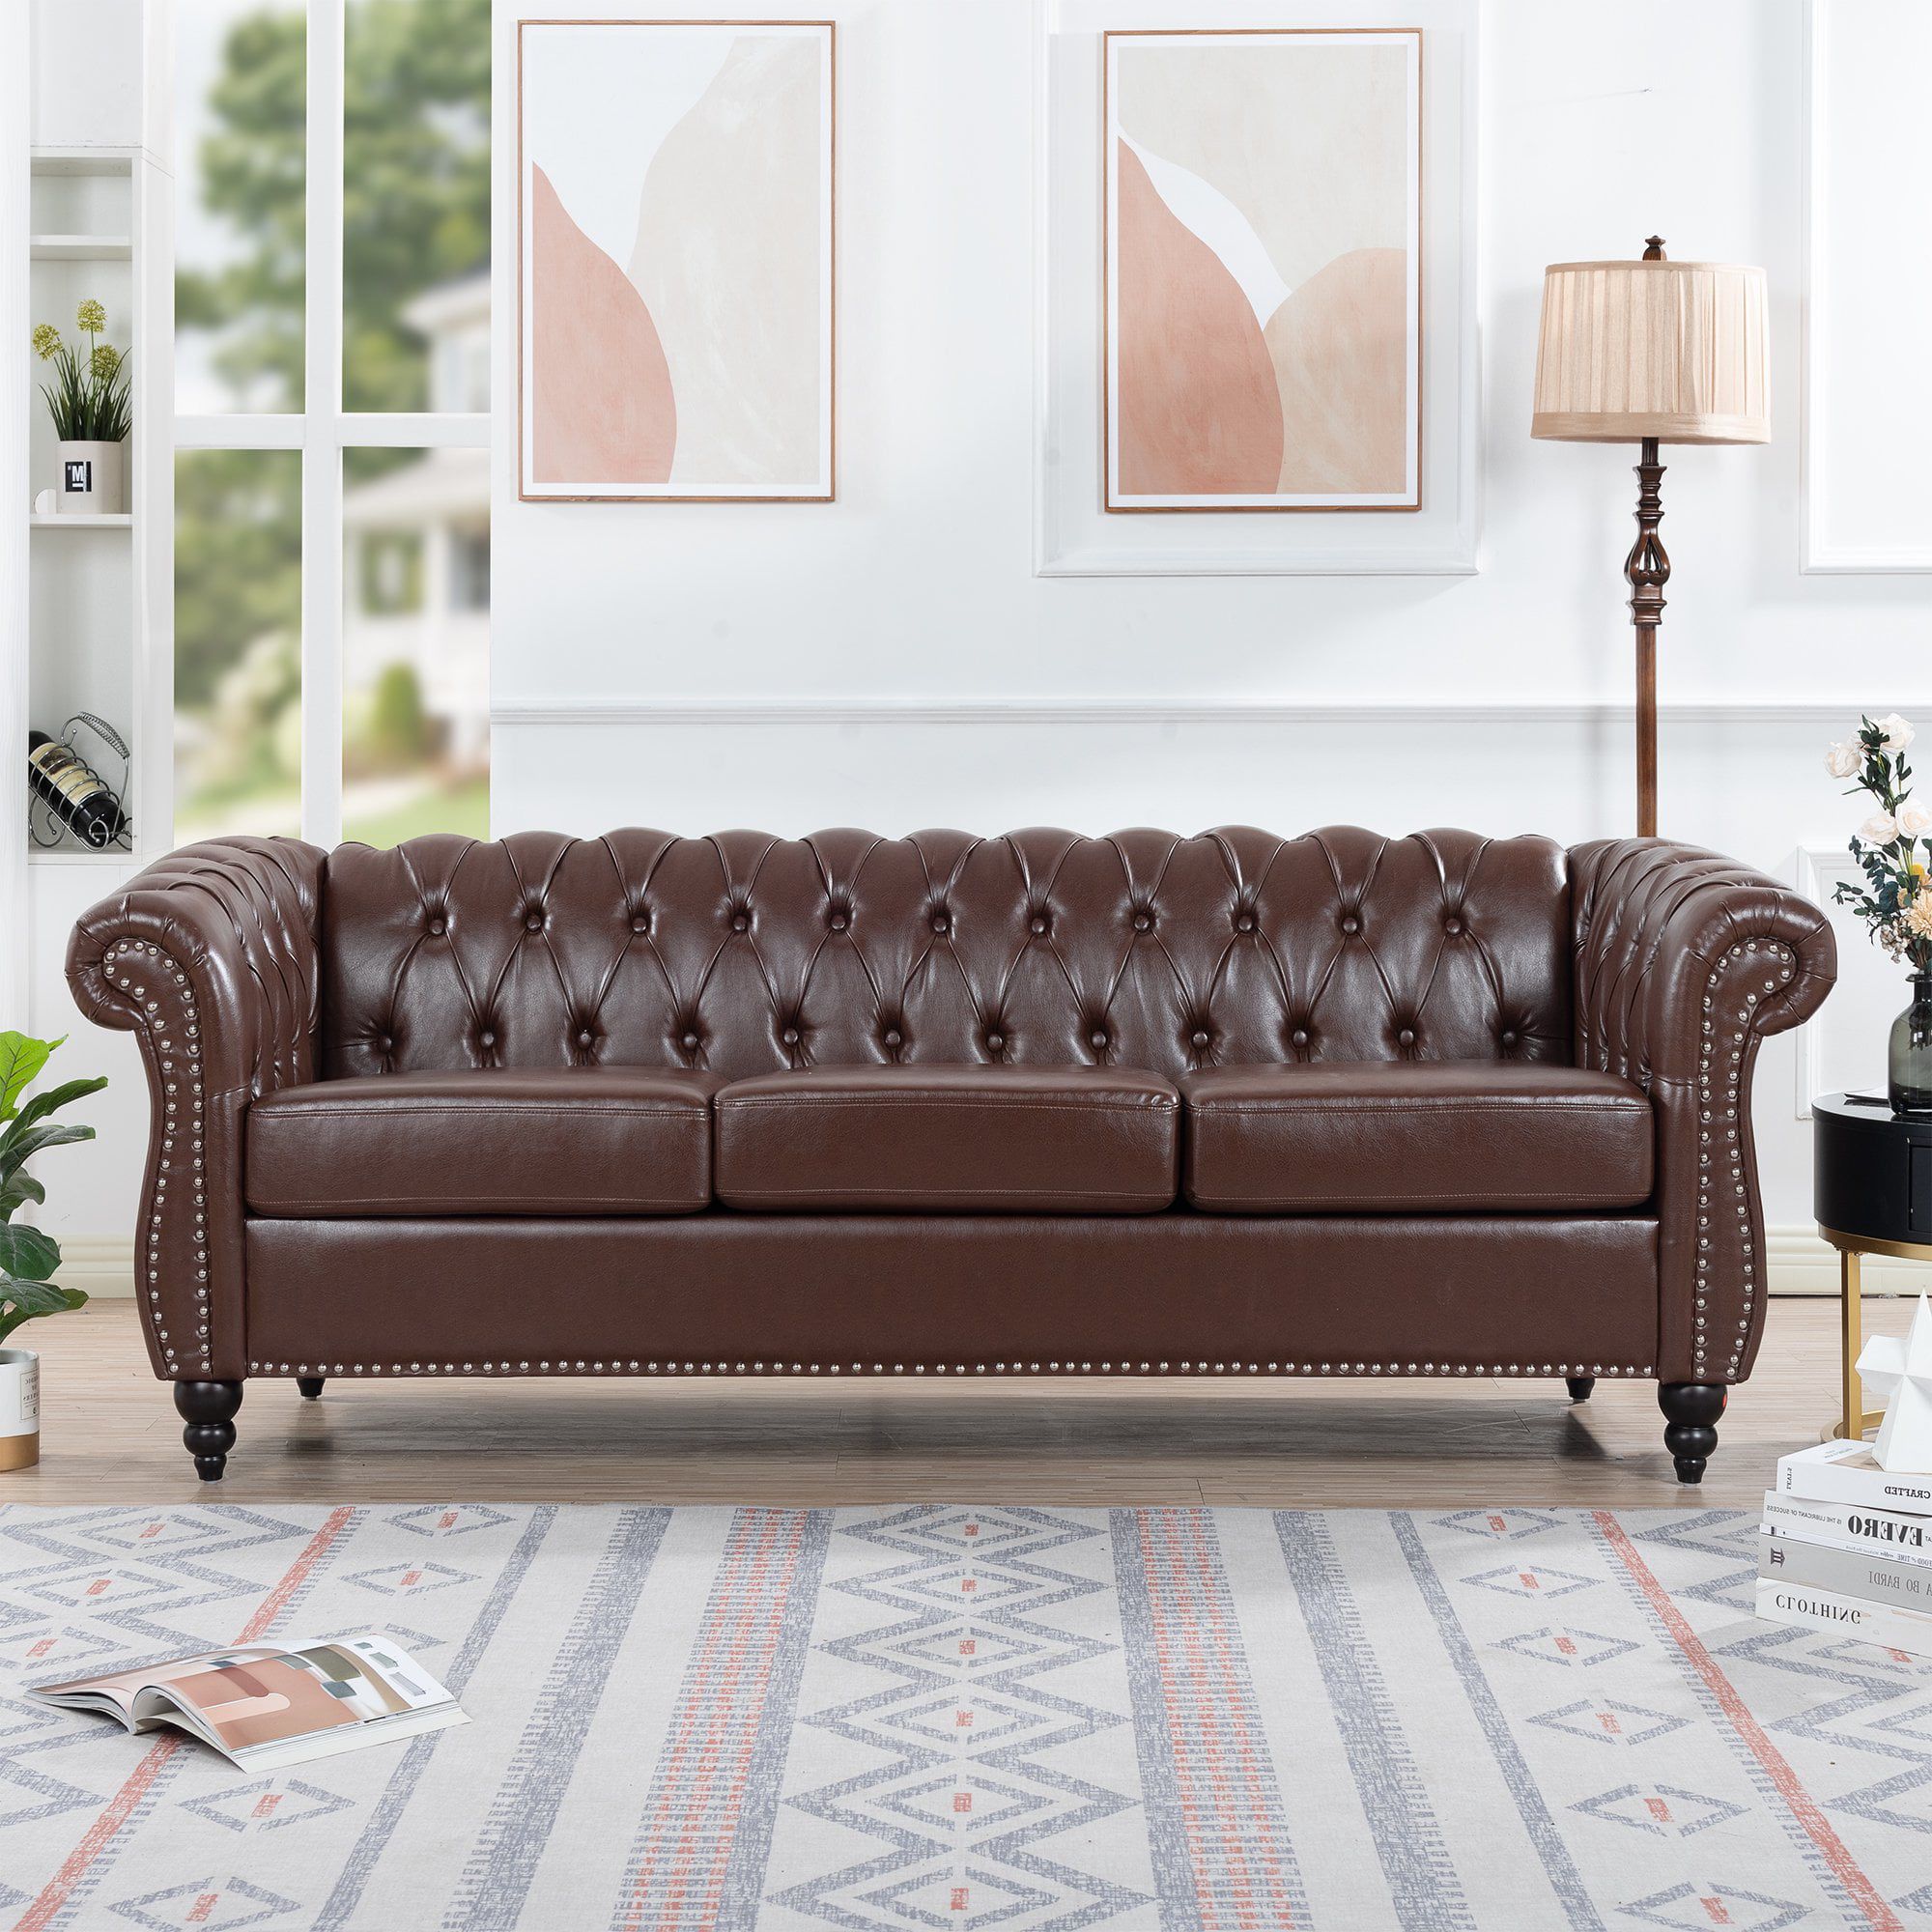 84" Pu Leather Chesterfield Sofas For Living Room, Rolled Arm 3 Seater  Large Couch Deep Button Nailhead Tufted Upholstered Couches For Bedroom,  Office Apartment – Dark Brown – Walmart For Sofas With Rolled Arm (Gallery 15 of 20)